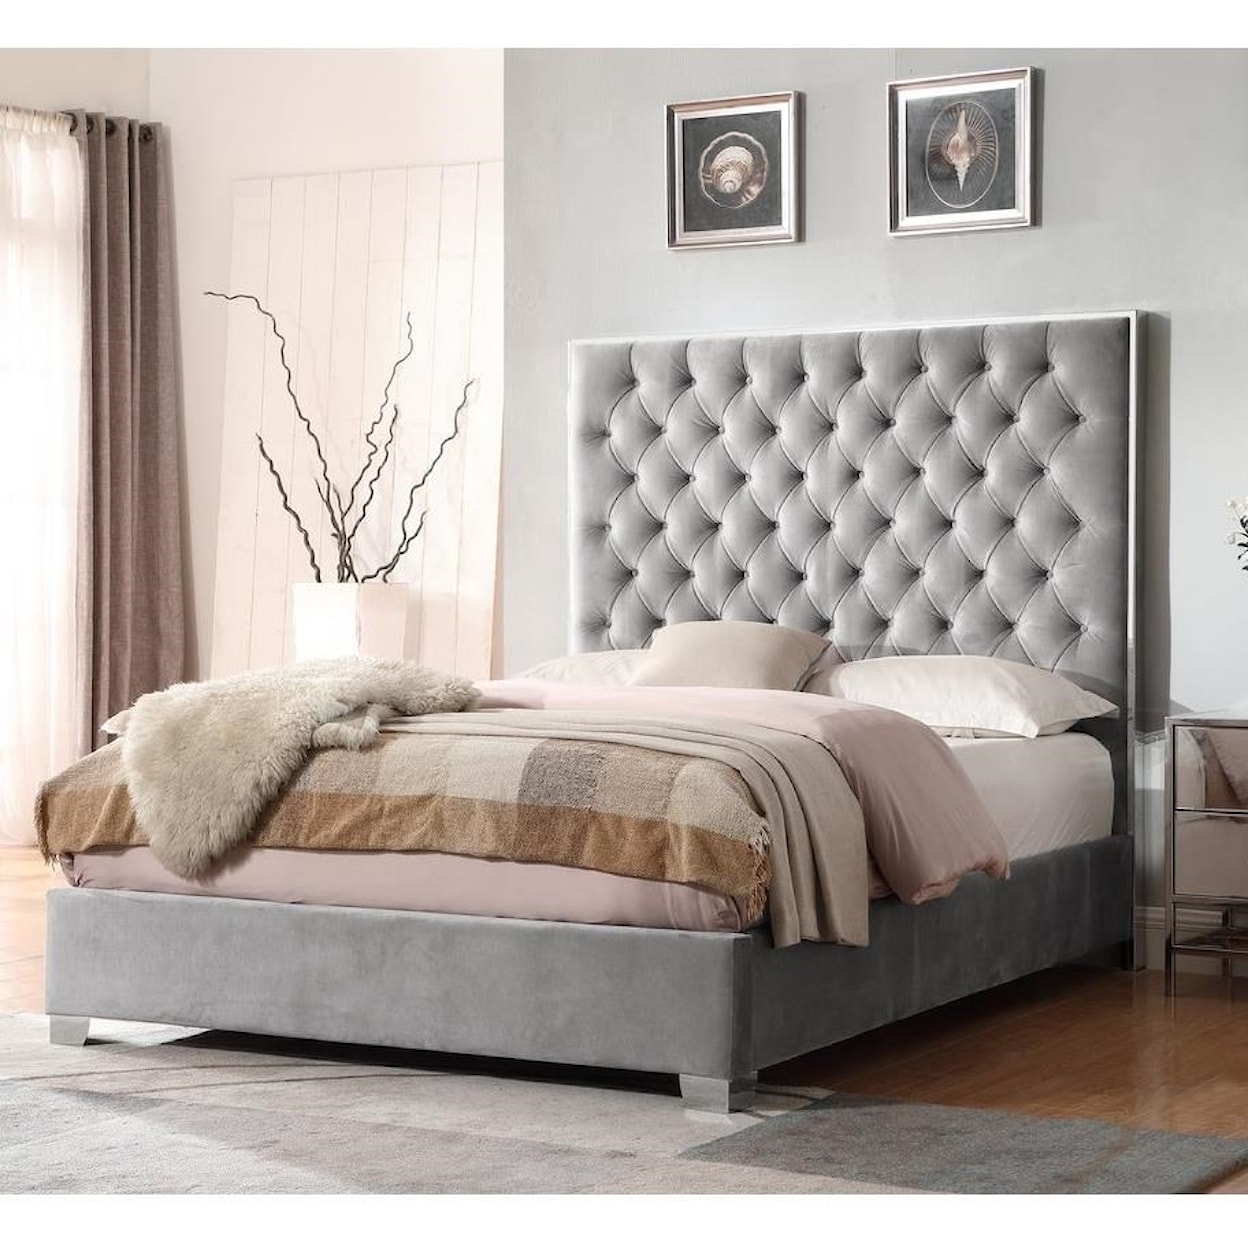 Emerald Lacey Queen Upholstered Bed